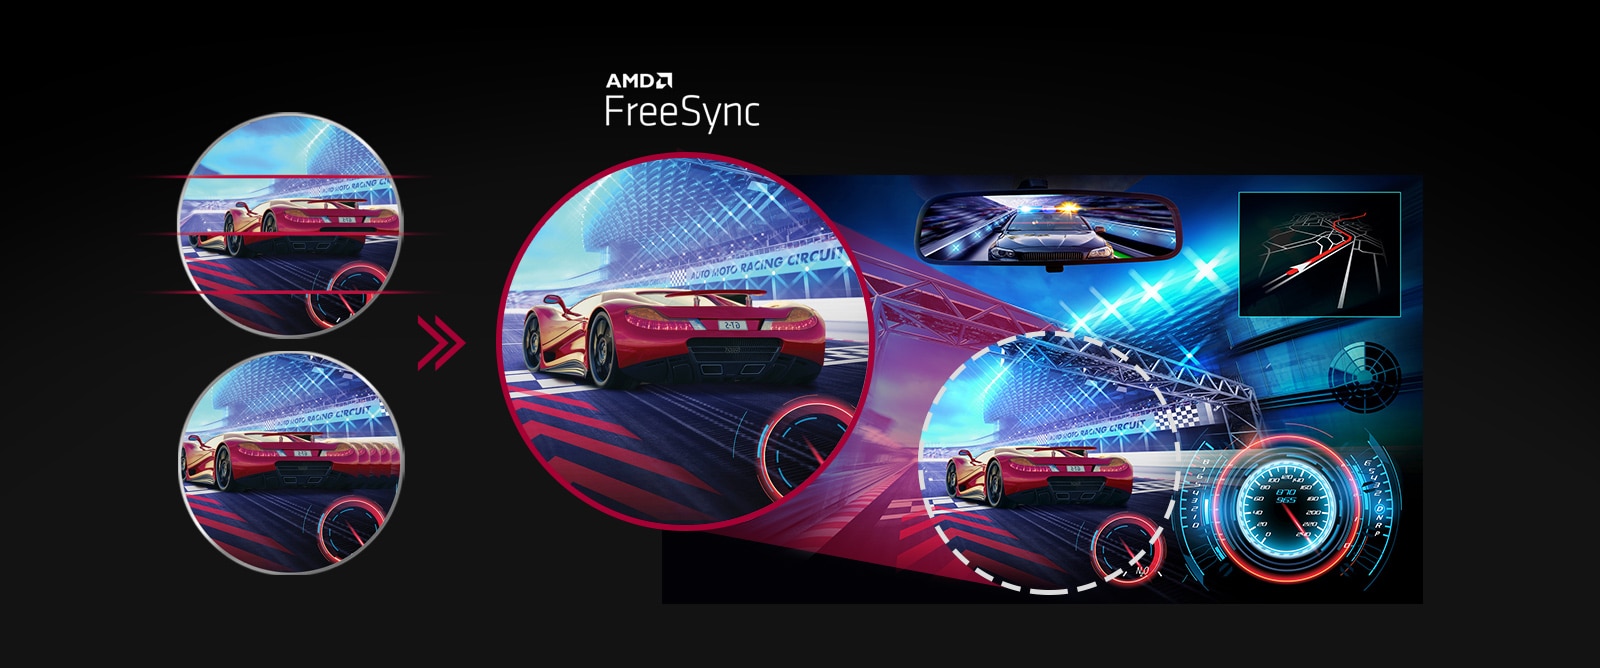 AMD FreeSync™ and more gaming features